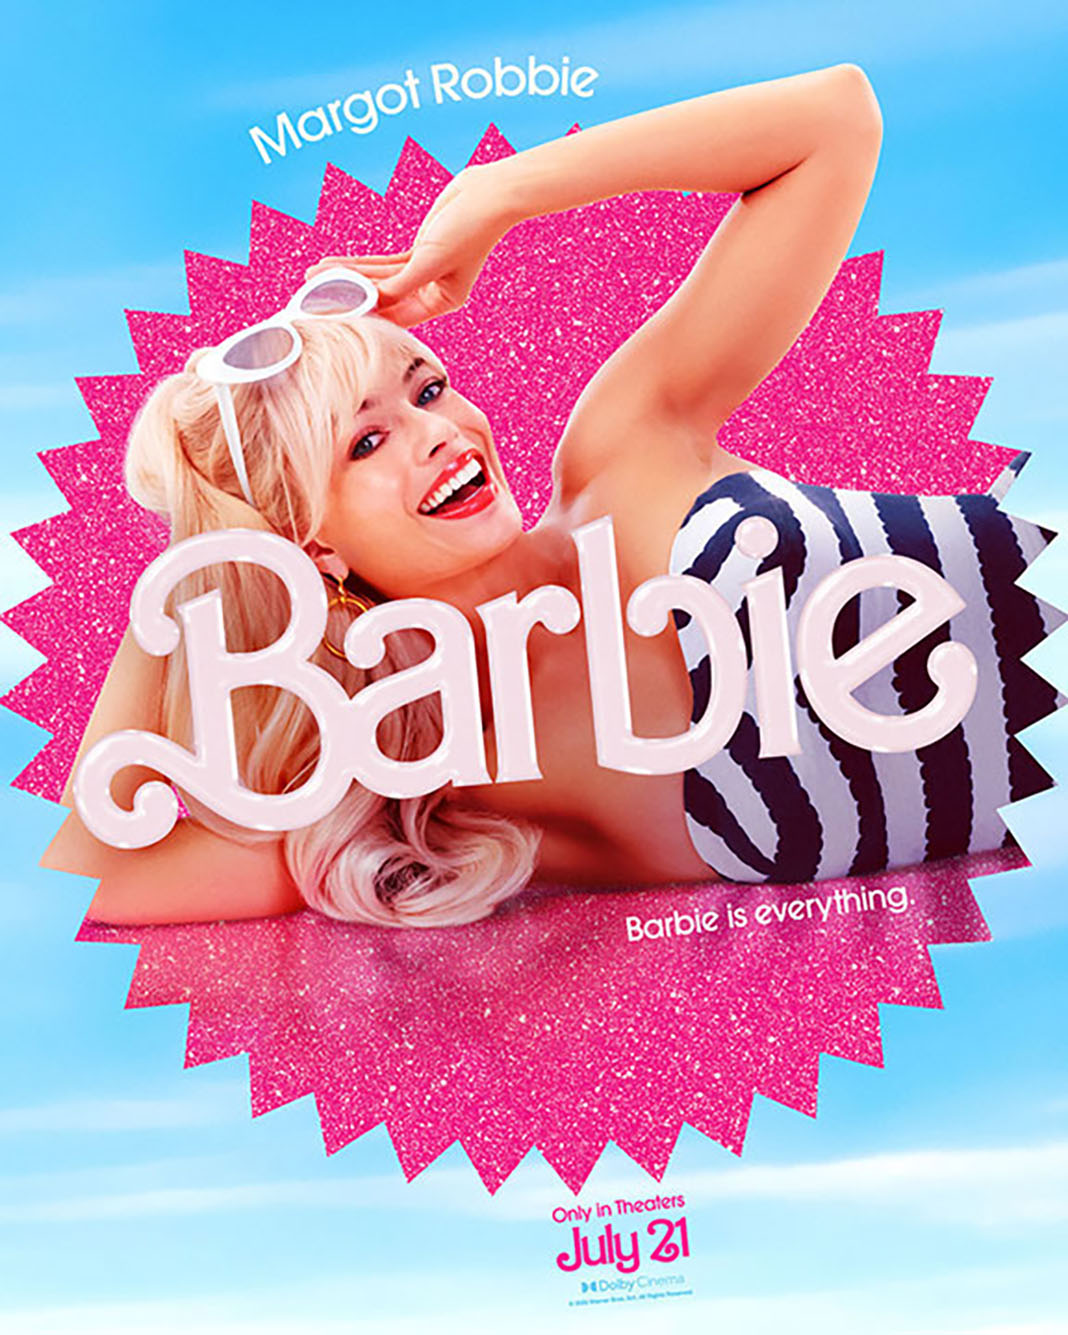 A parent's guide to 'Barbie': What to know before watching it with the kids